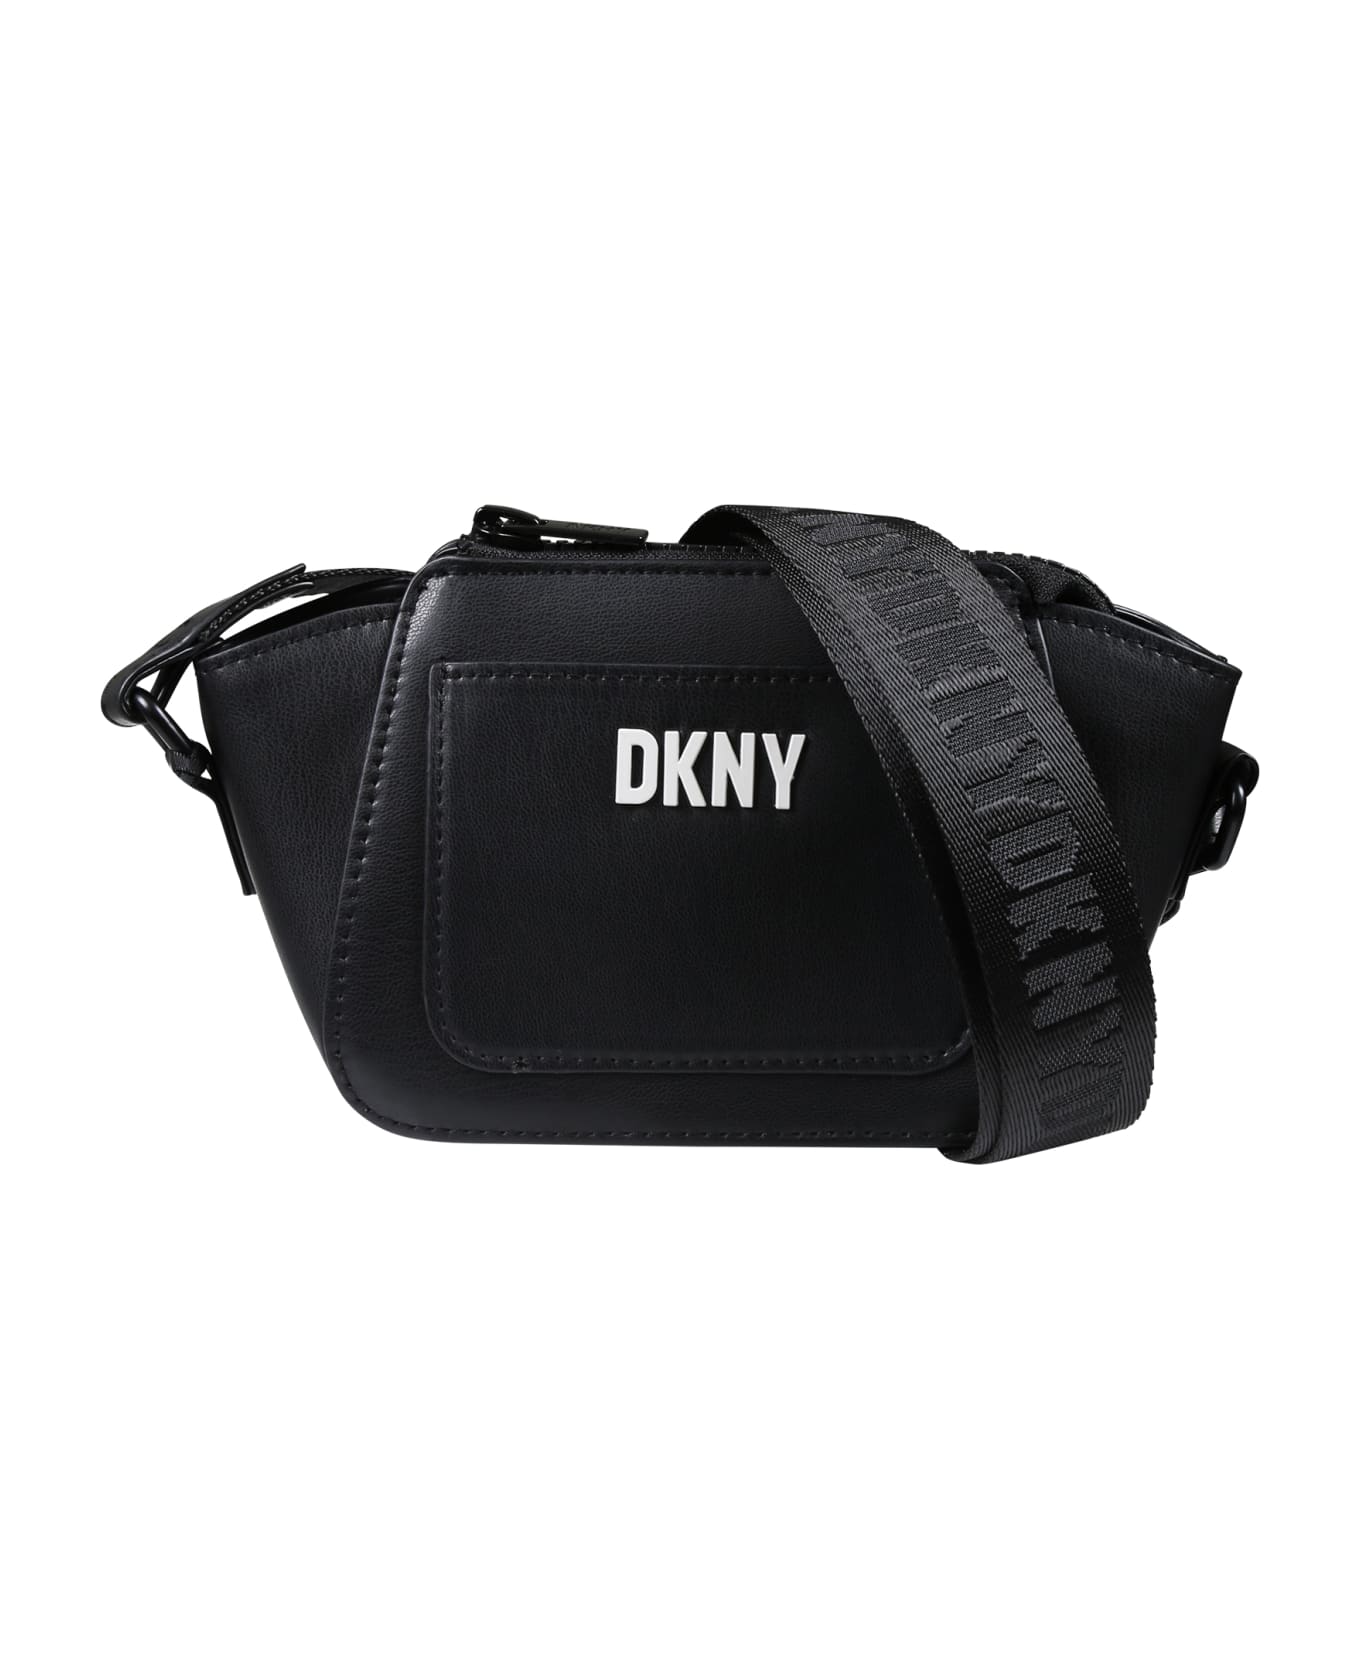 DKNY Black Bag For Girl With Logo - B Nero アクセサリー＆ギフト